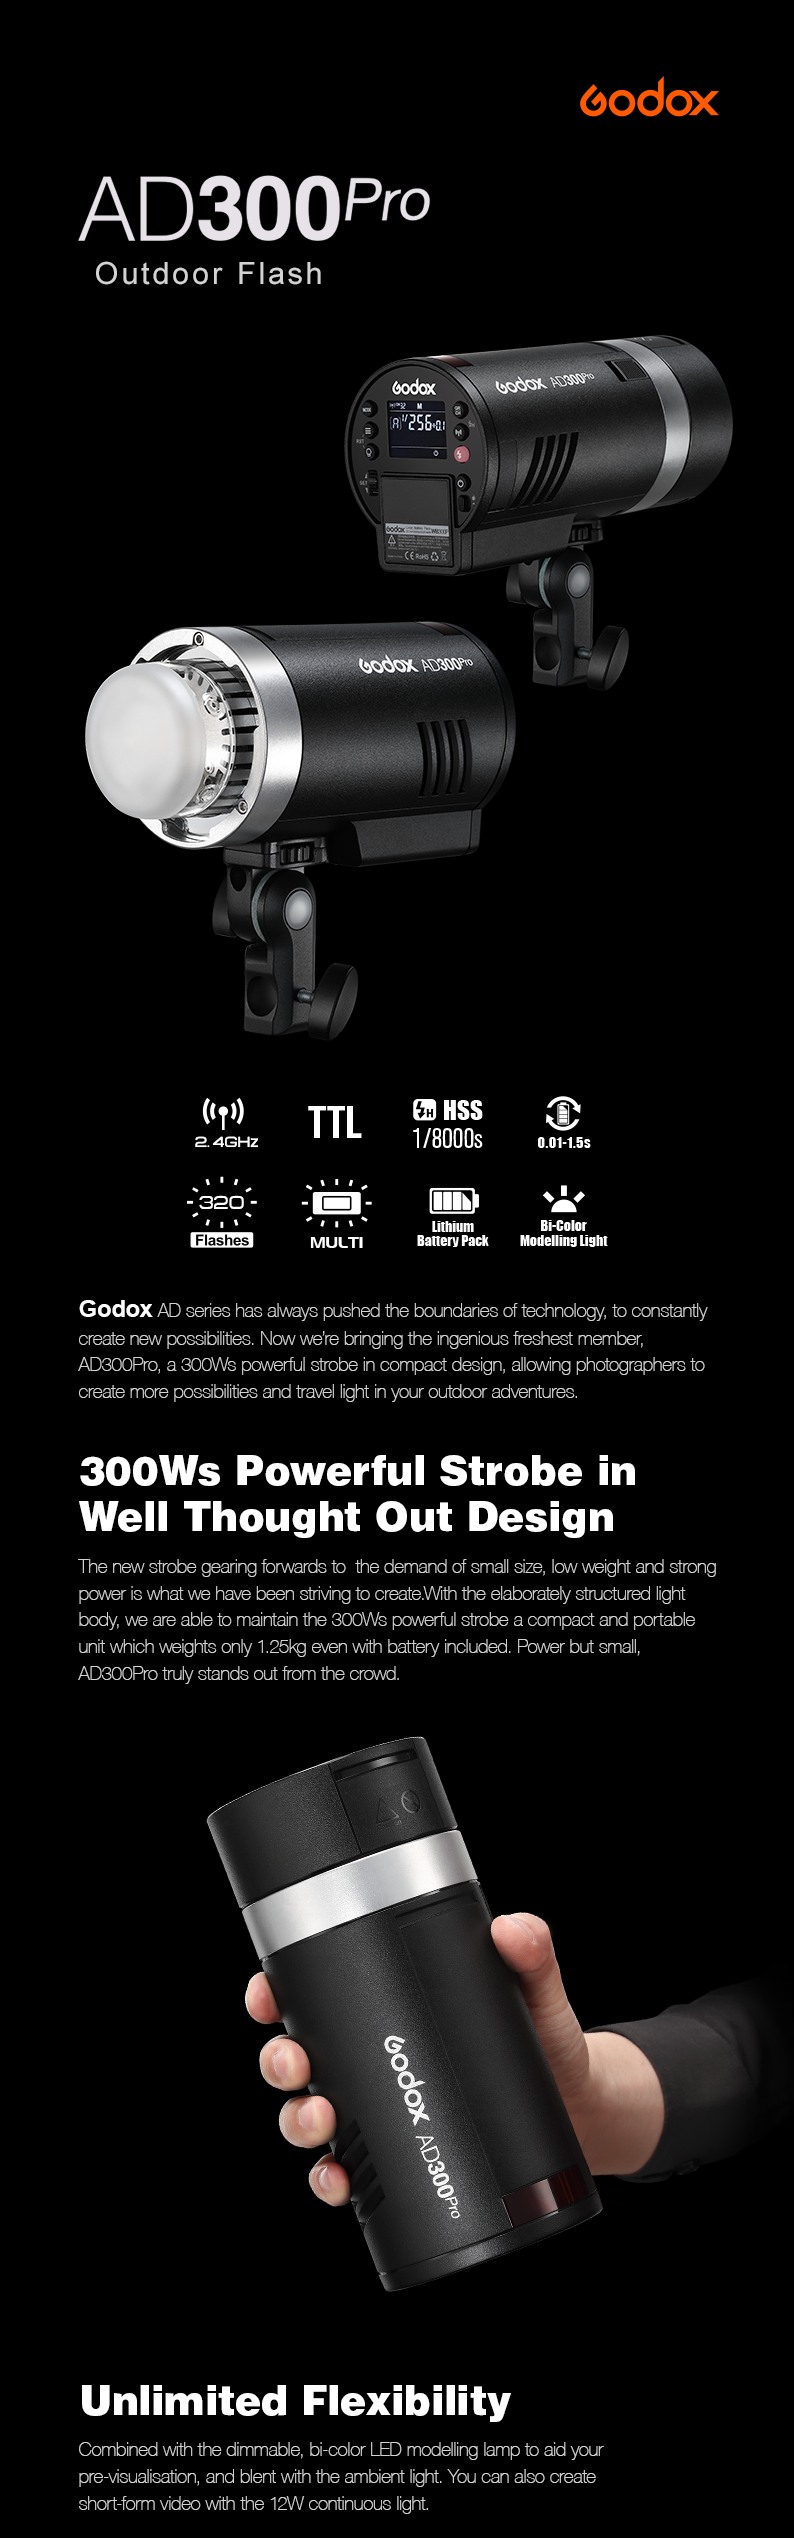 Godox AD300Pro Outdoor Flash. 300Ws Powerful Strobe in Well Thought Out Design. Unlimited Flexibility. 